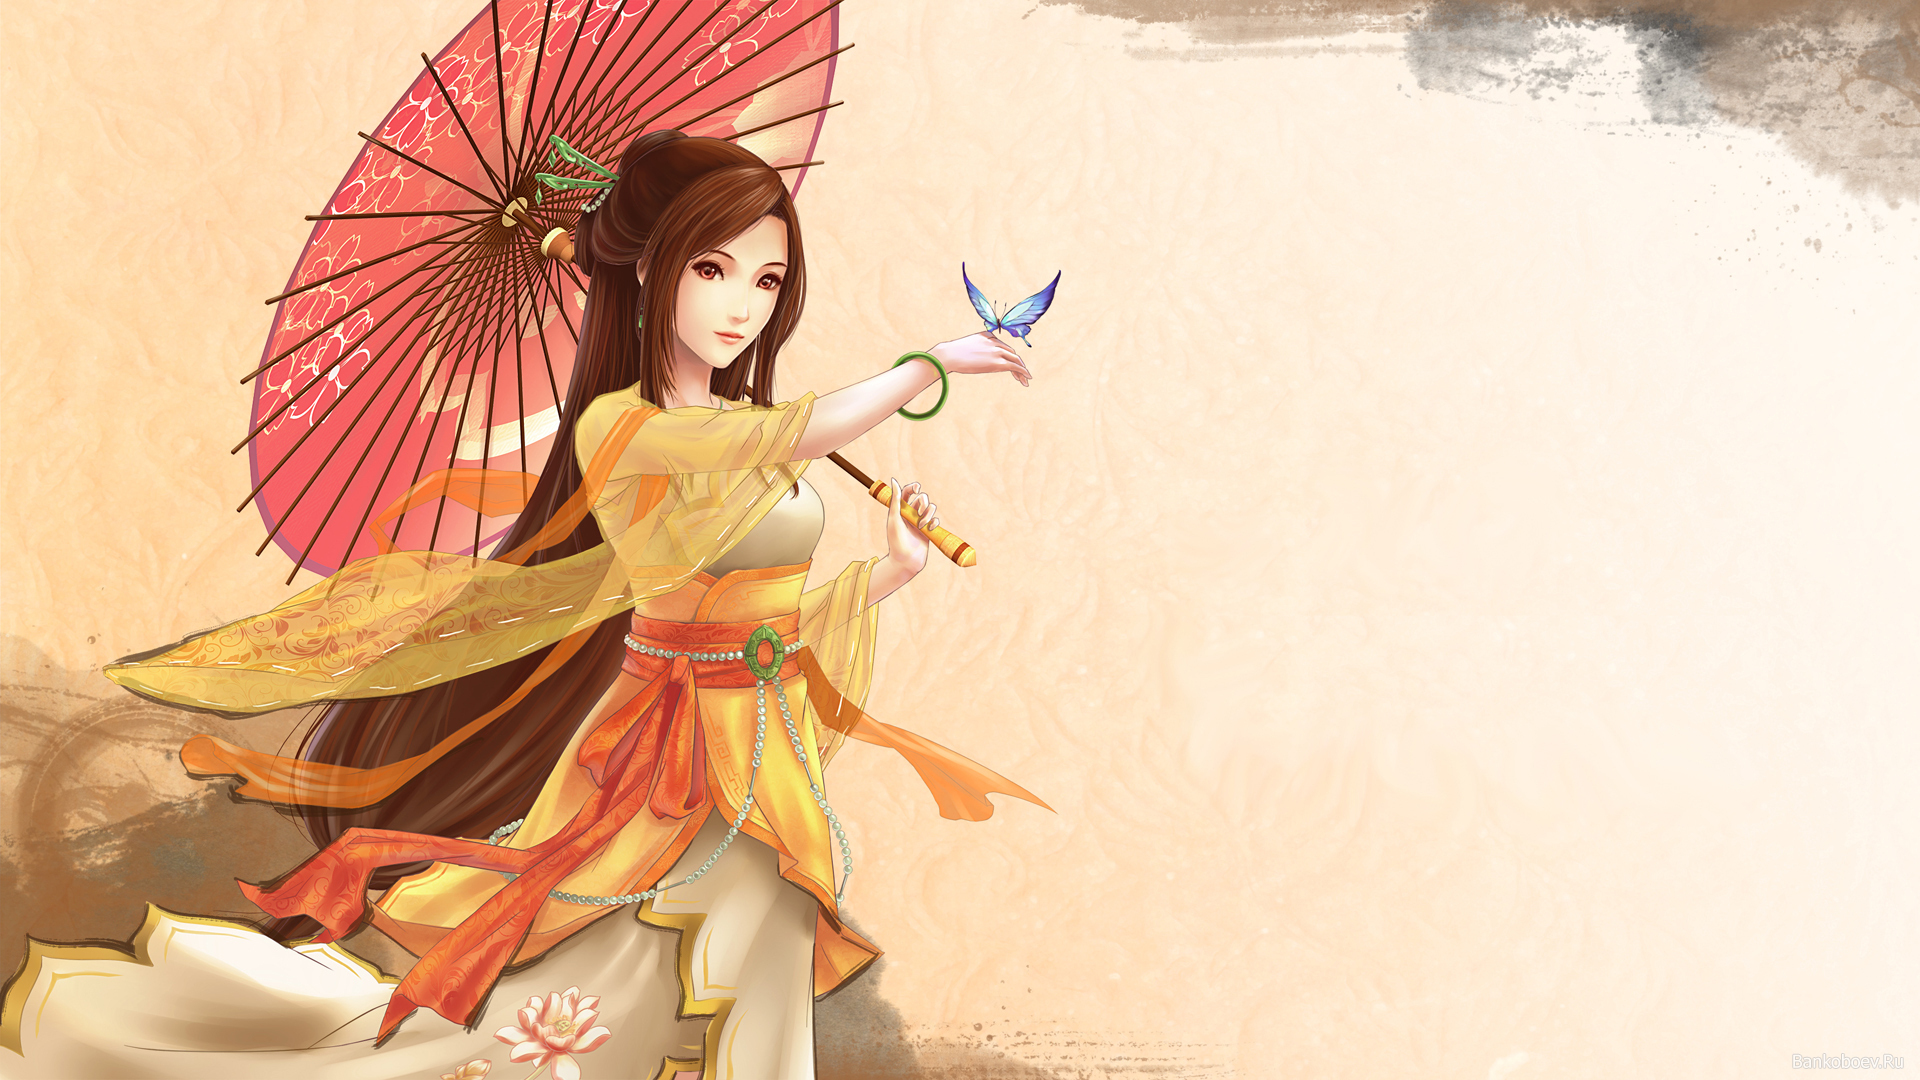 Wallpaper sadness girl decoration pose weapons Japanese art profile kimono  images for desktop section арт  download